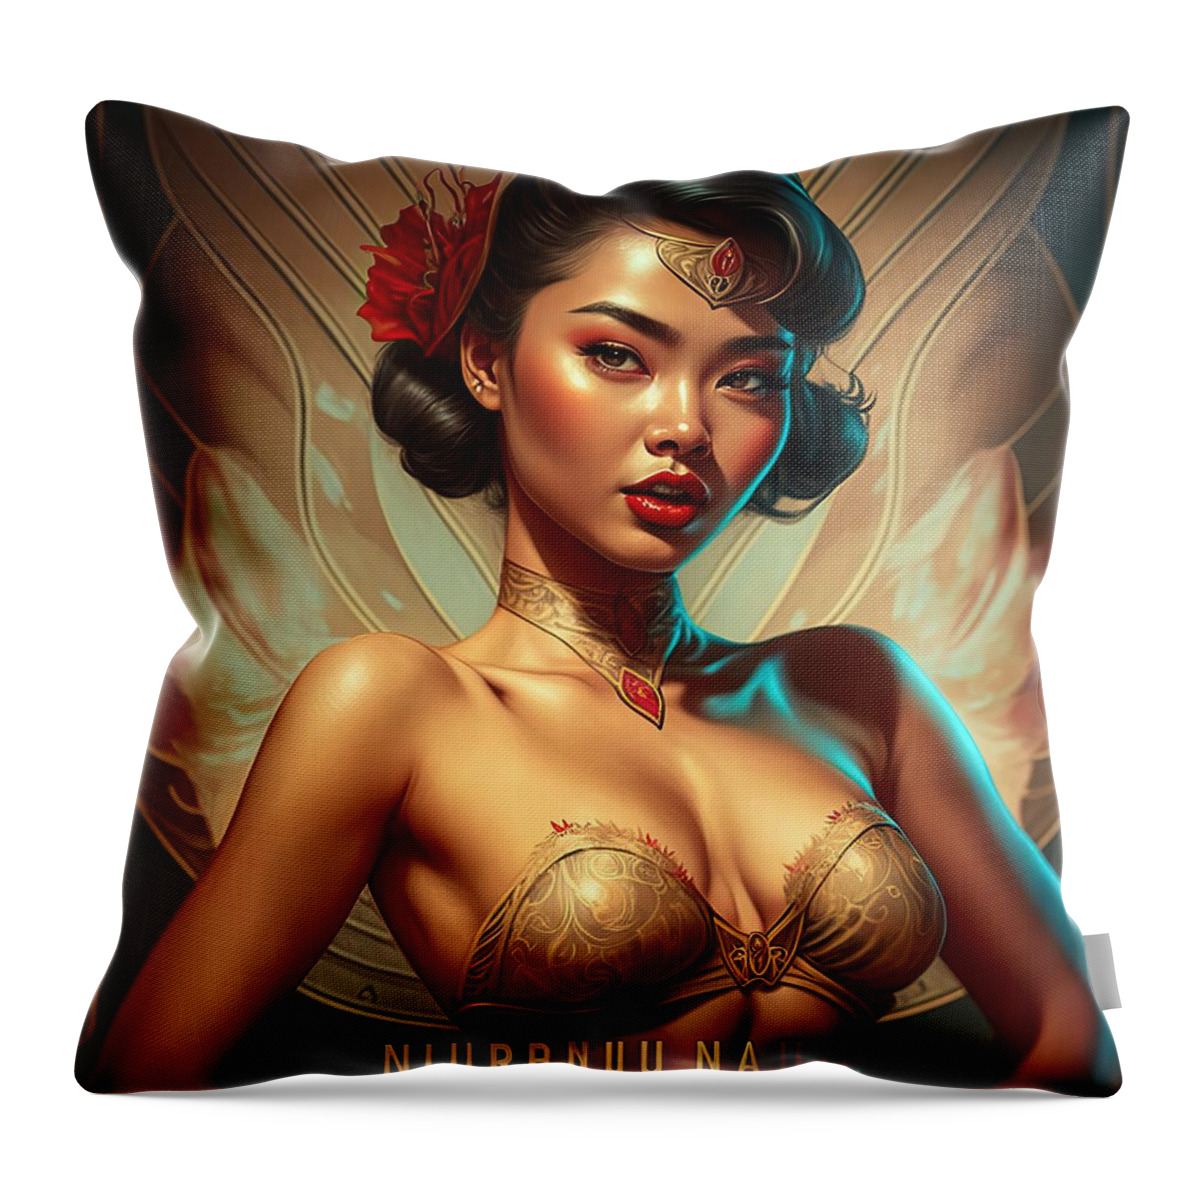 Pin Up Throw Pillow featuring the digital art My beauty lotus flower by My Head Cinema